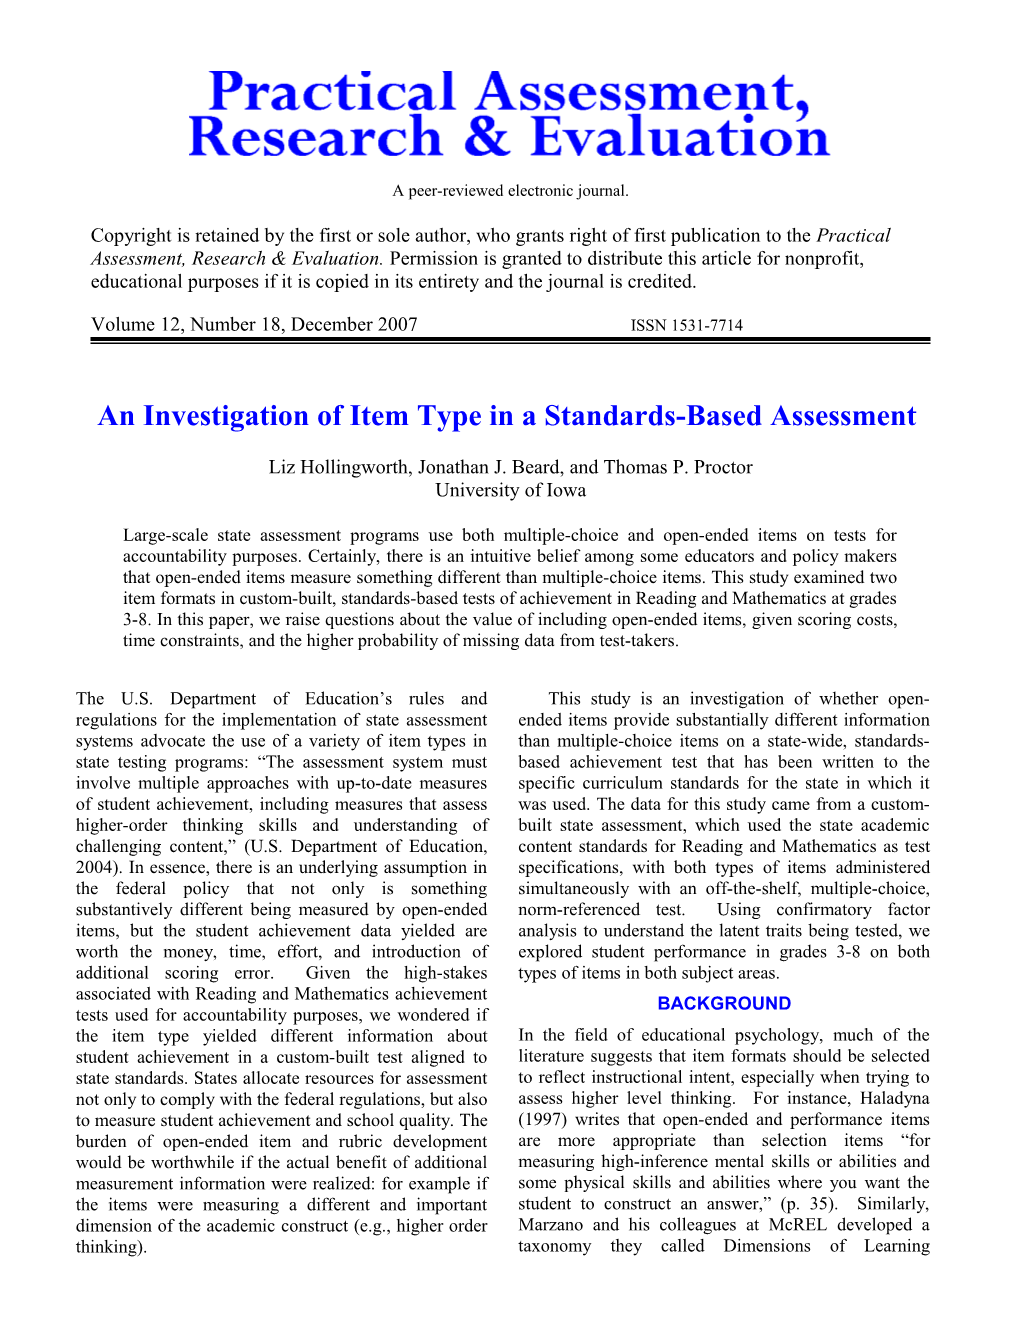 An Investigation of Item Type in a Standards-Based Assessment